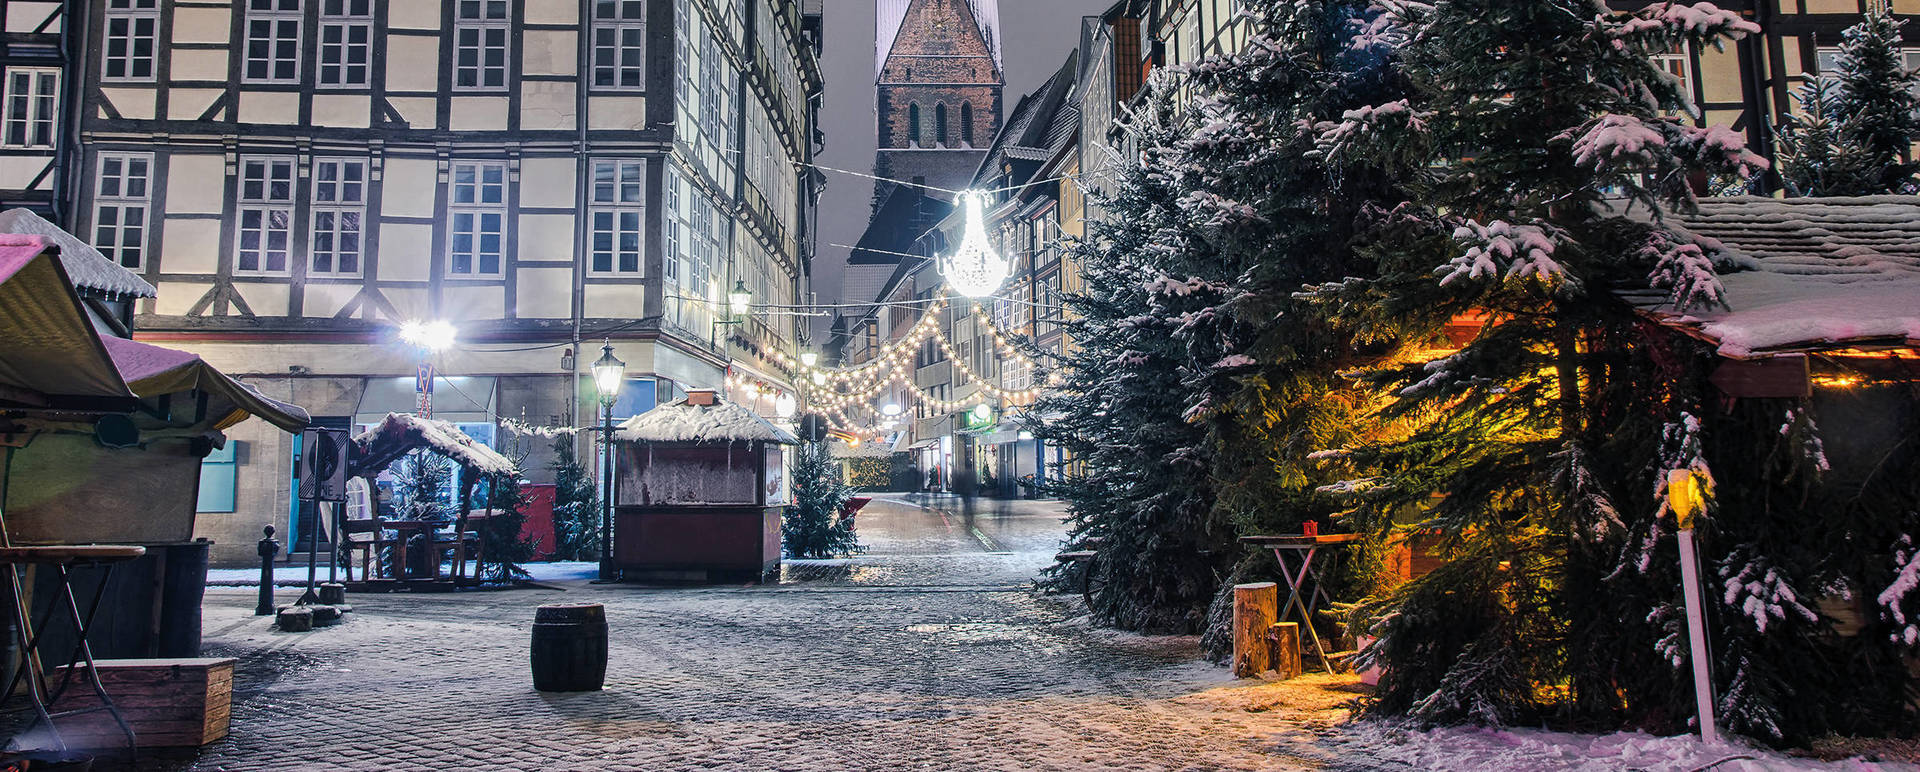 Weihnachtsshopping in Hannover - H-Hotels.com - Offizielle Webseite